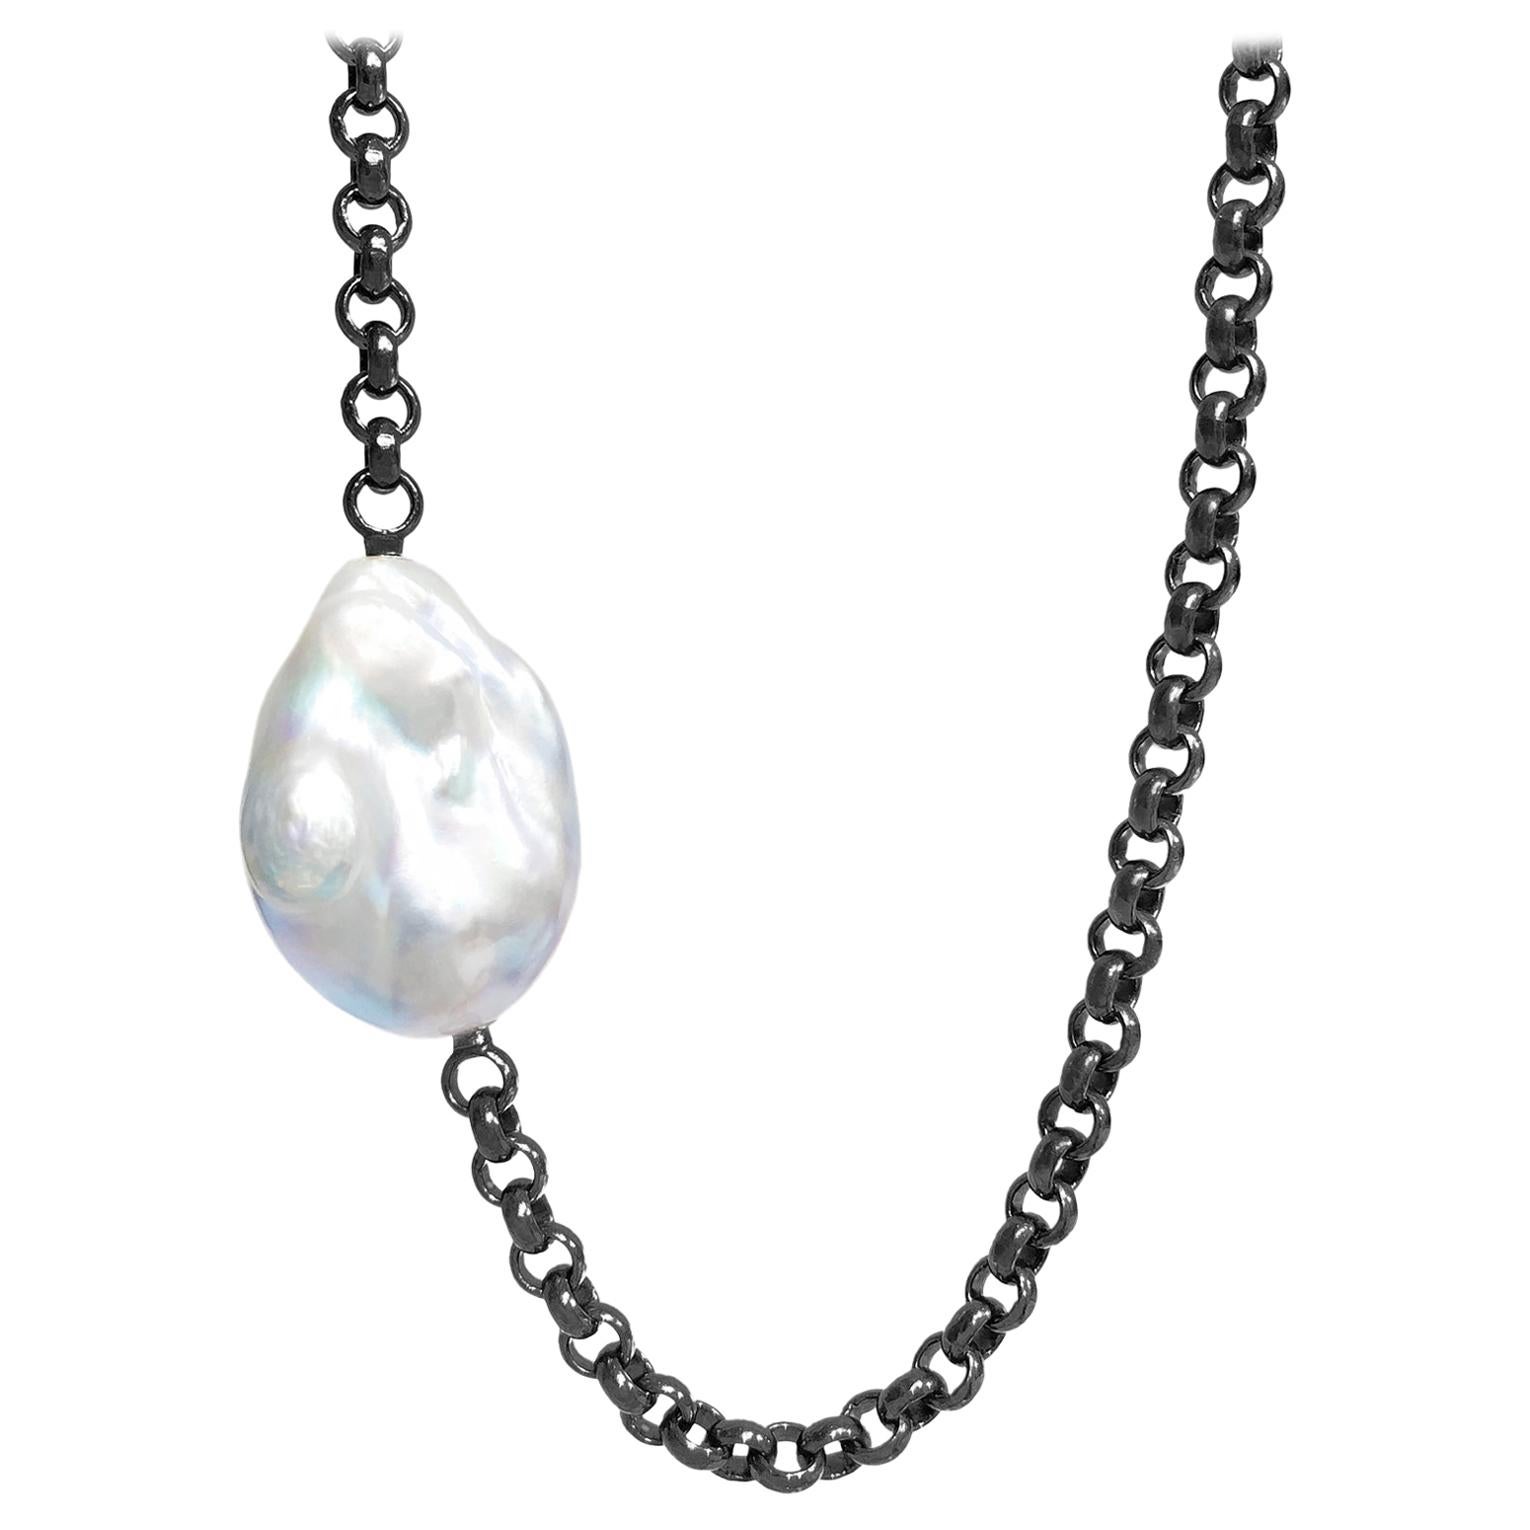 Atelier Zobel Exceptional Freshwater Baroque Pearl Black Trace Chain Necklace